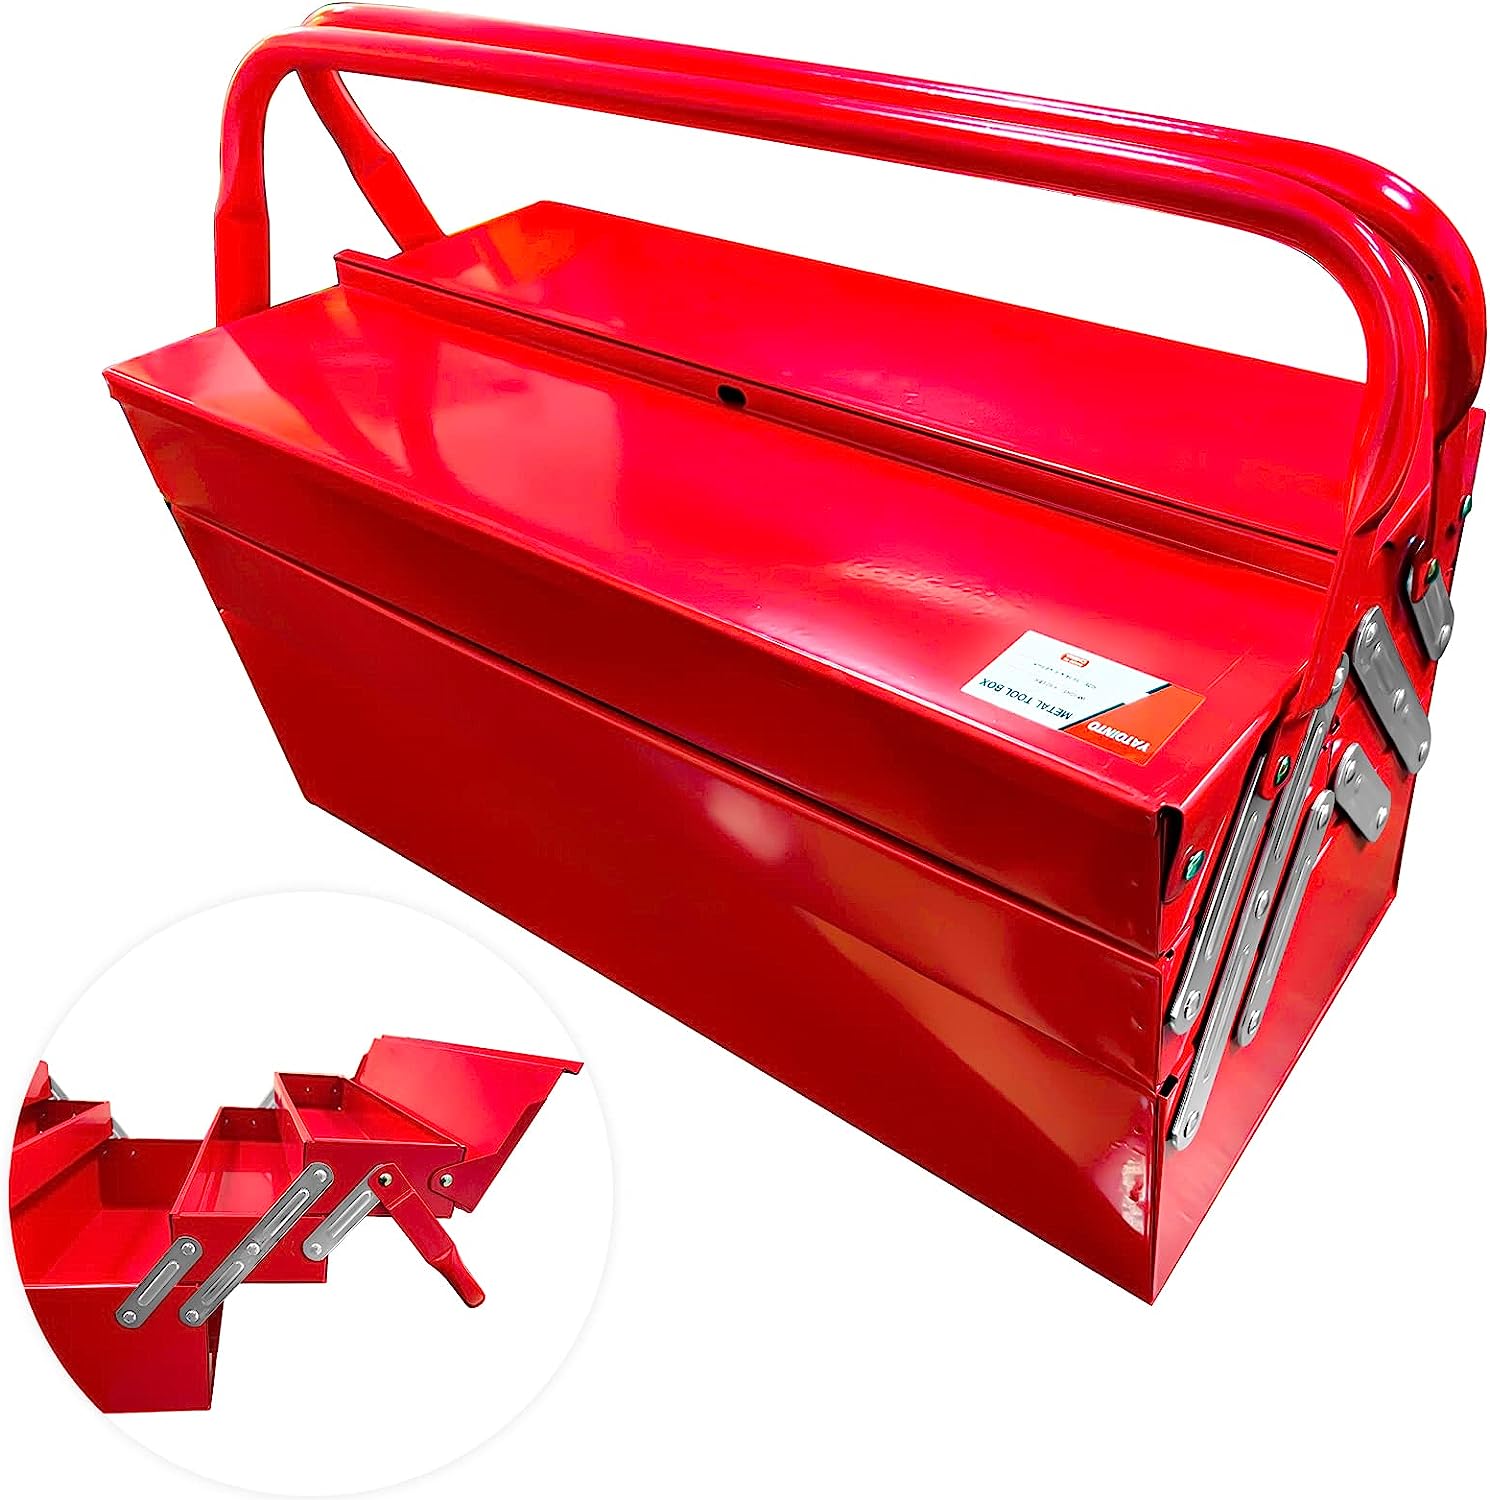 YATOINTO 18-Inch Metal Cantilever Tool Box 3 layers [...]